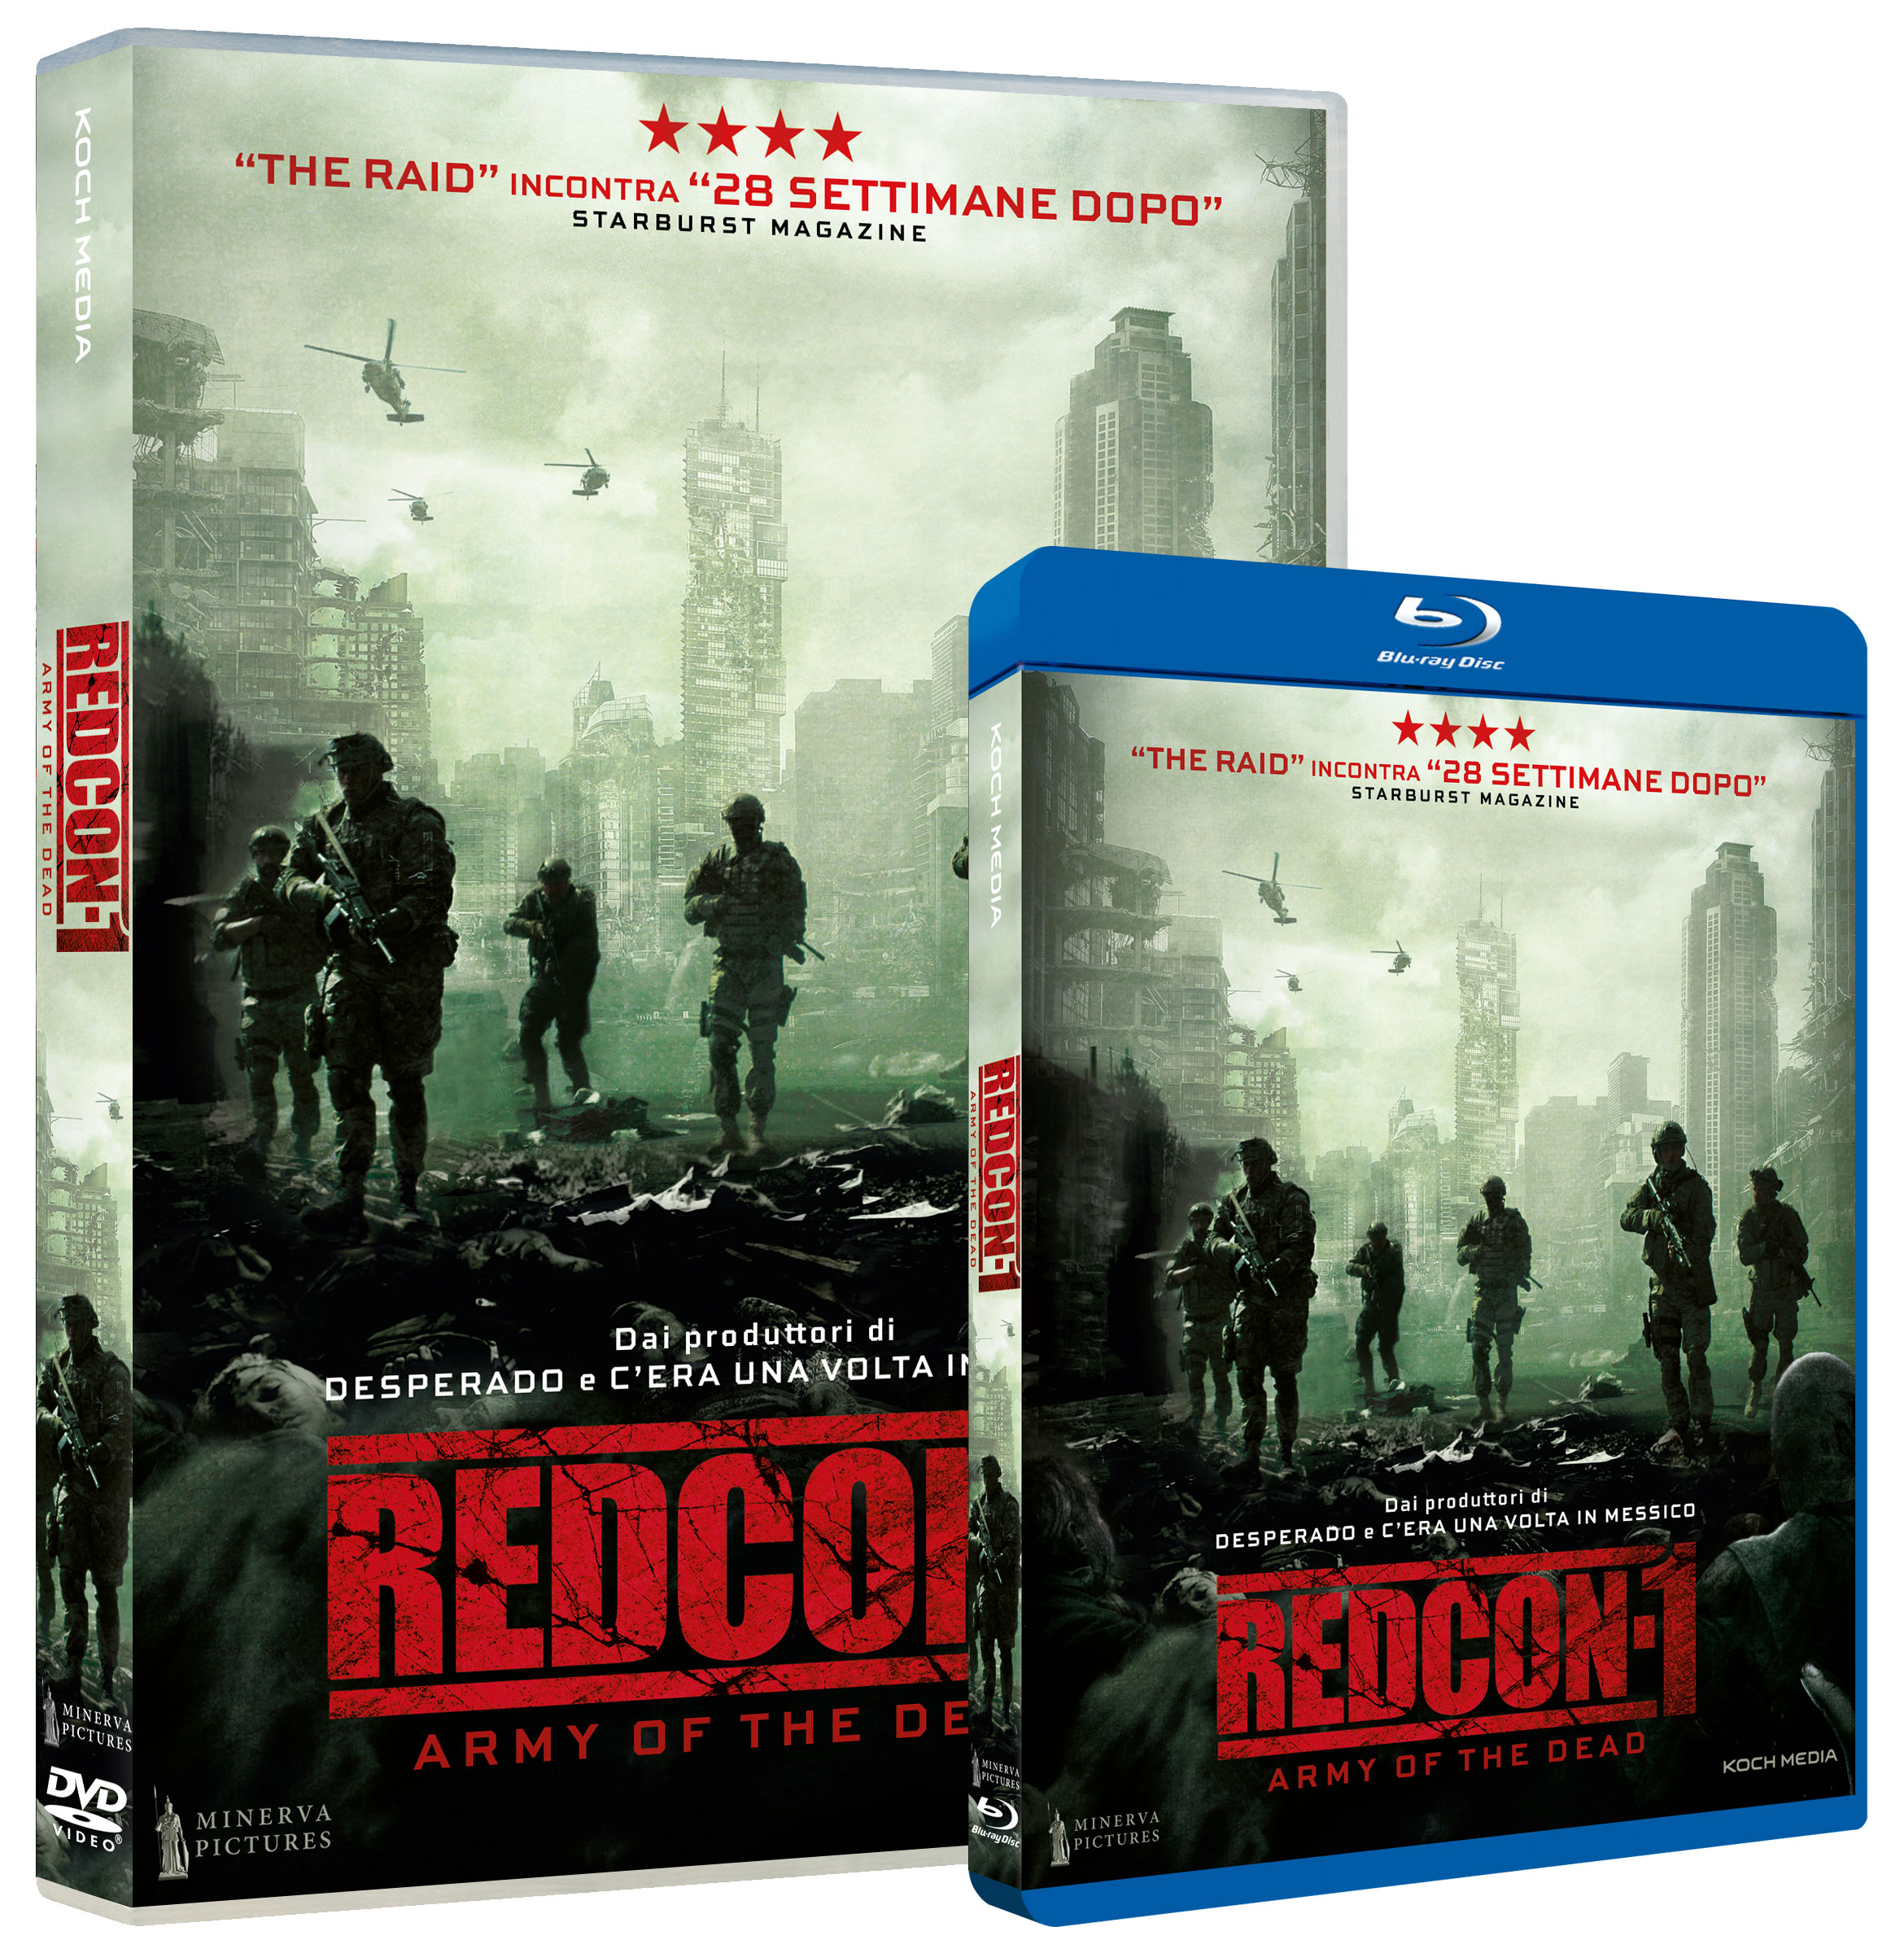 REDCON-1 Army of the Dead 